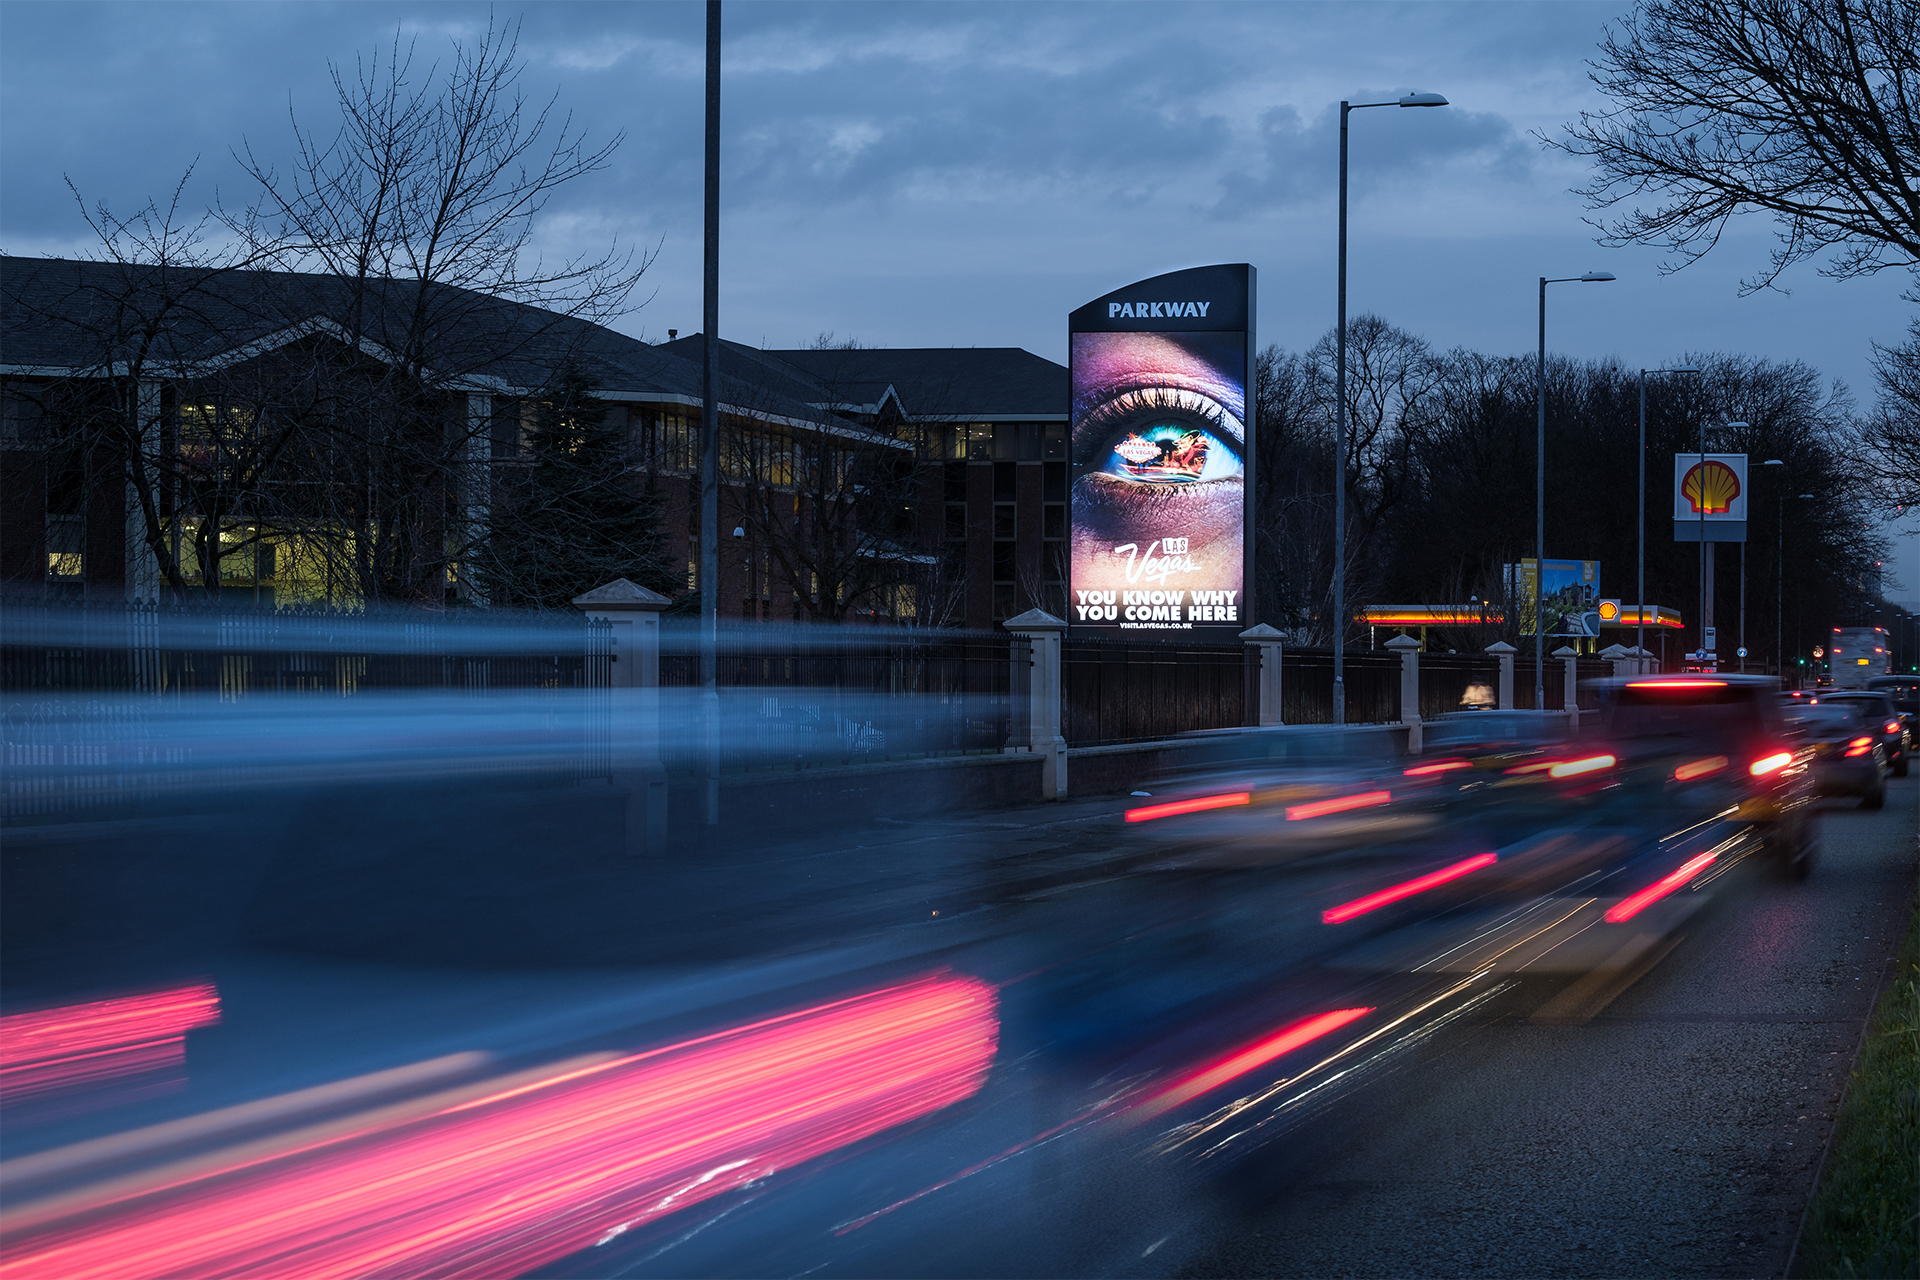 Image shows a large digital screen on Parkway